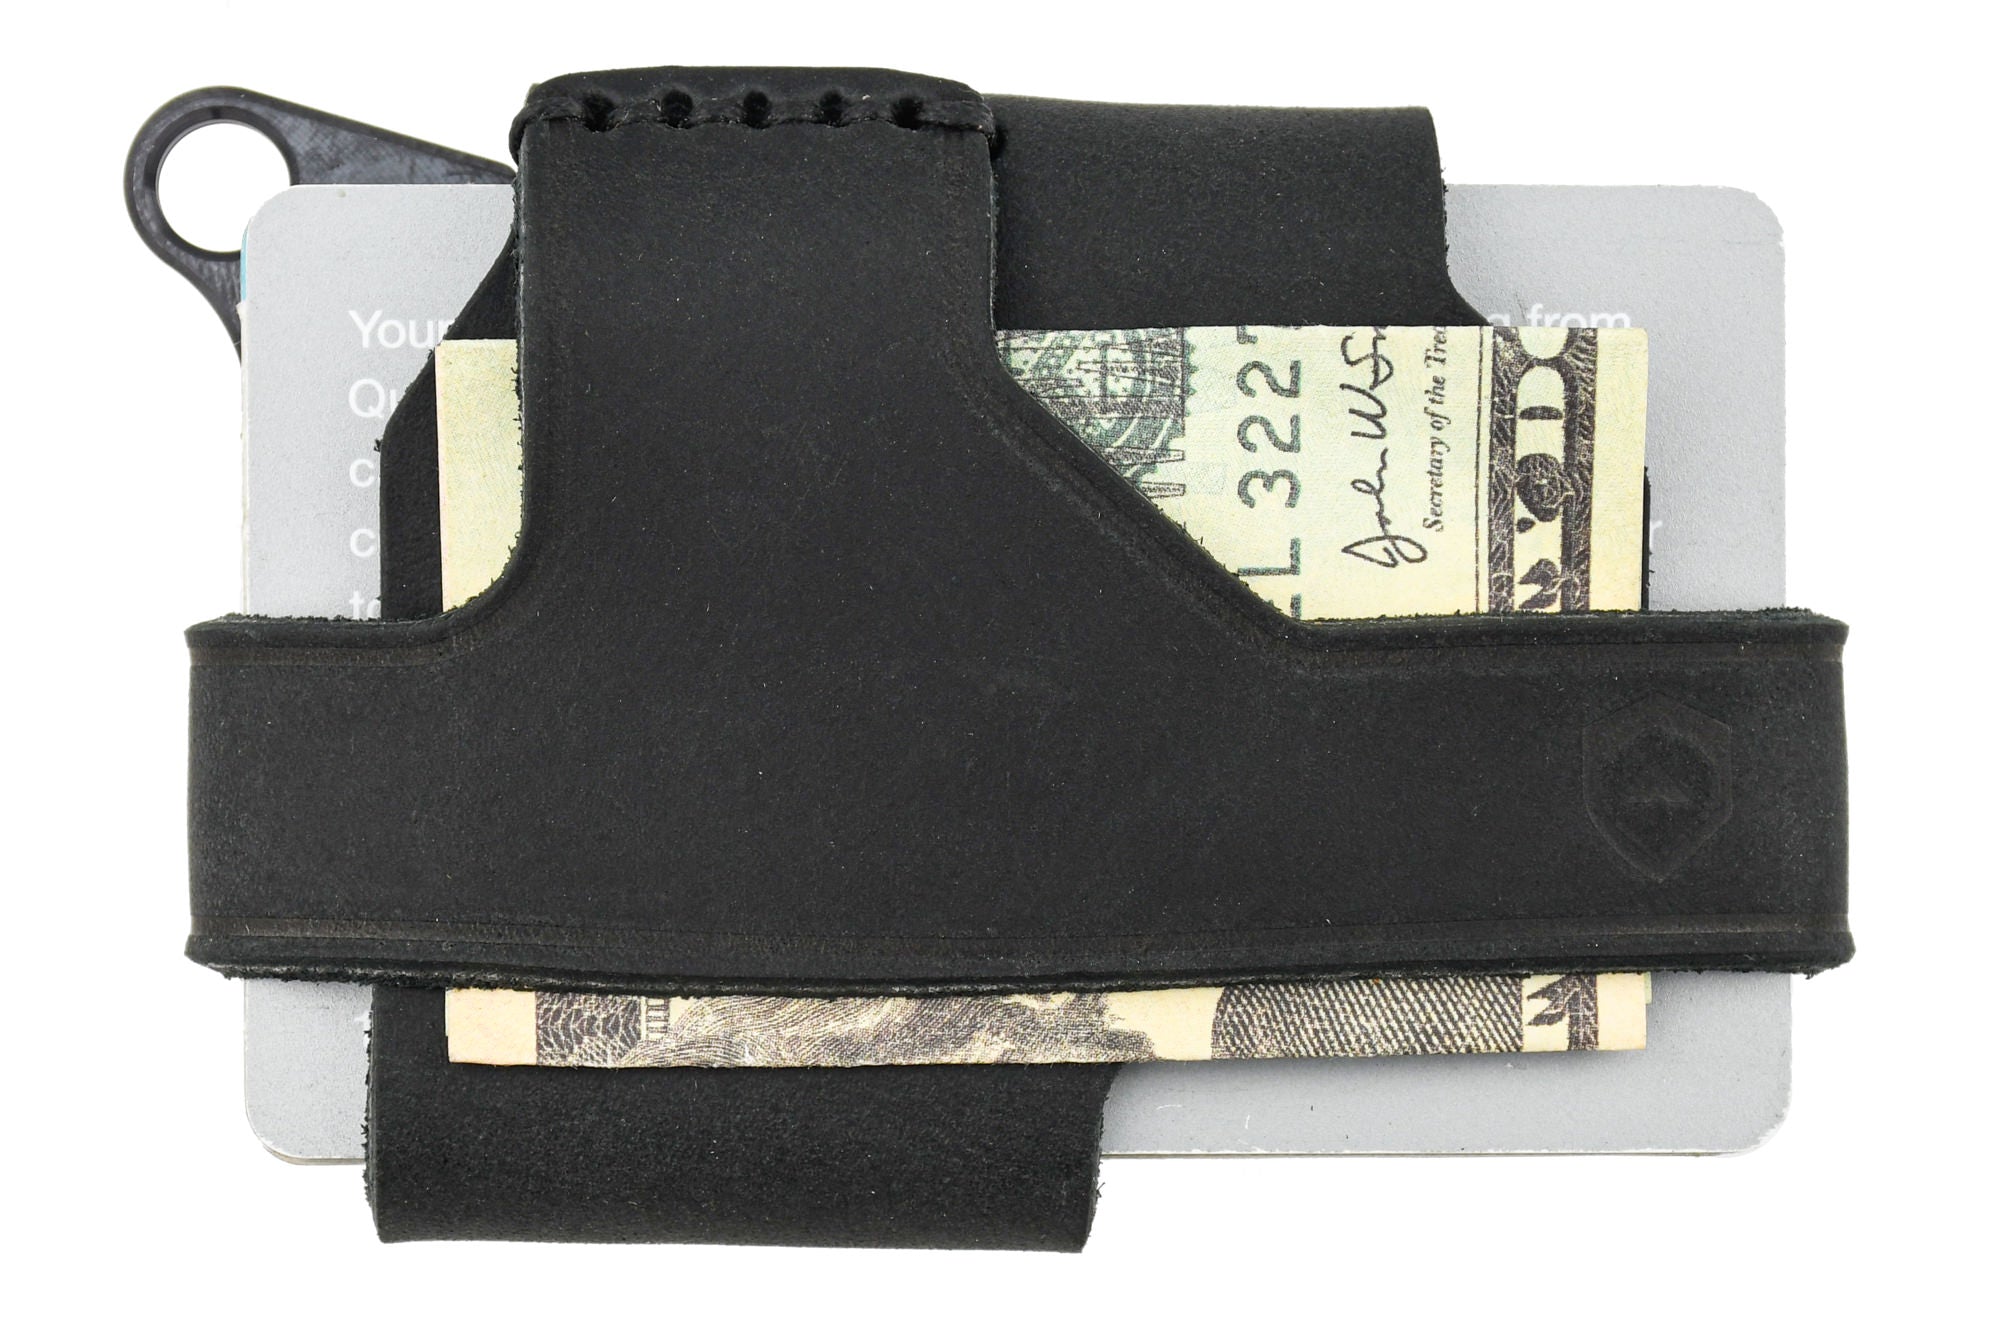 Make Sure You're Protected: 4 Benefits of an RFID Blocking Wallet